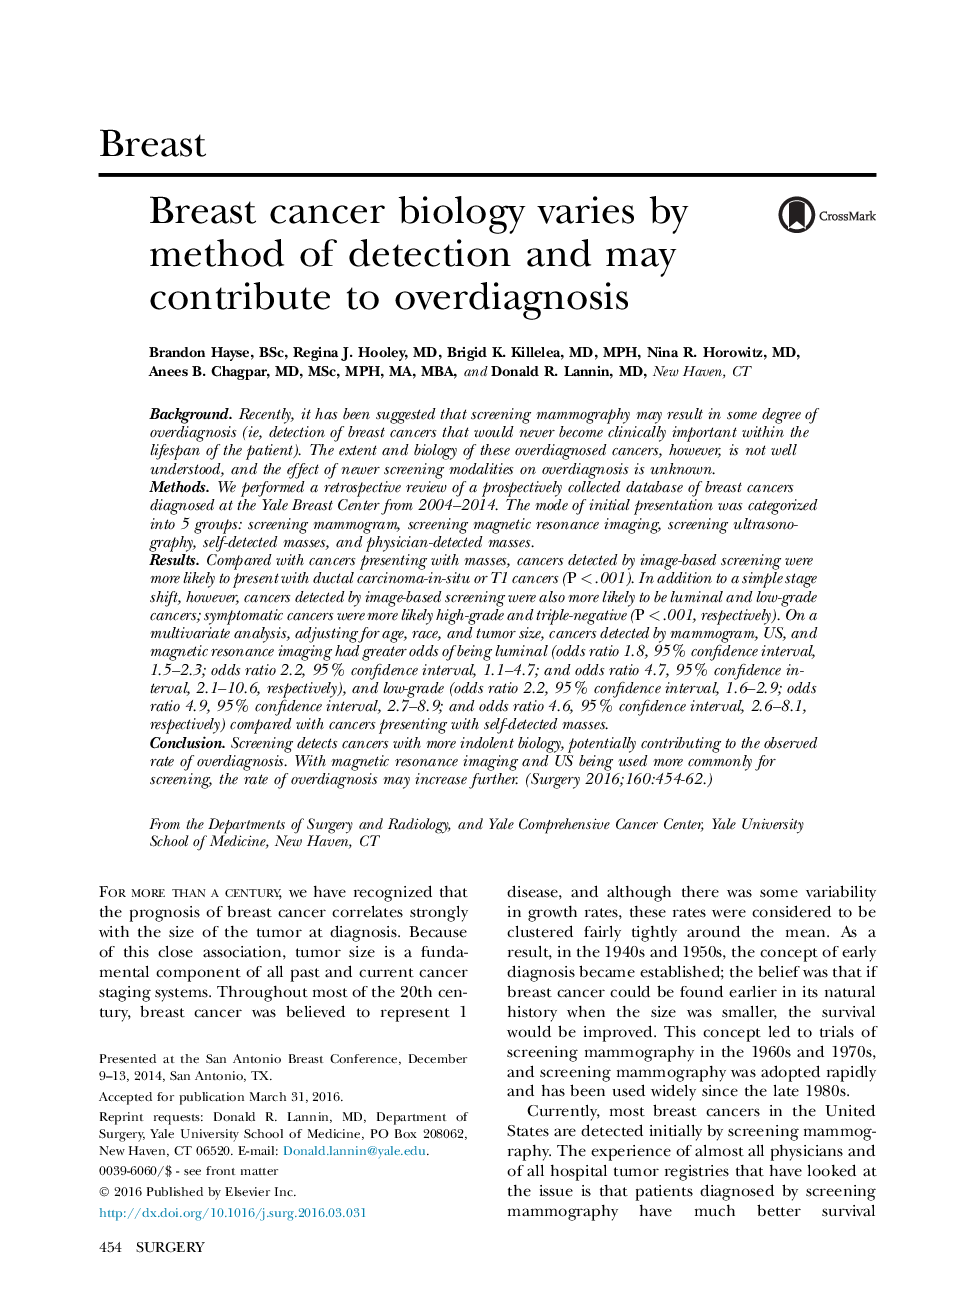 BreastBreast cancer biology varies by method of detection and may contribute to overdiagnosis